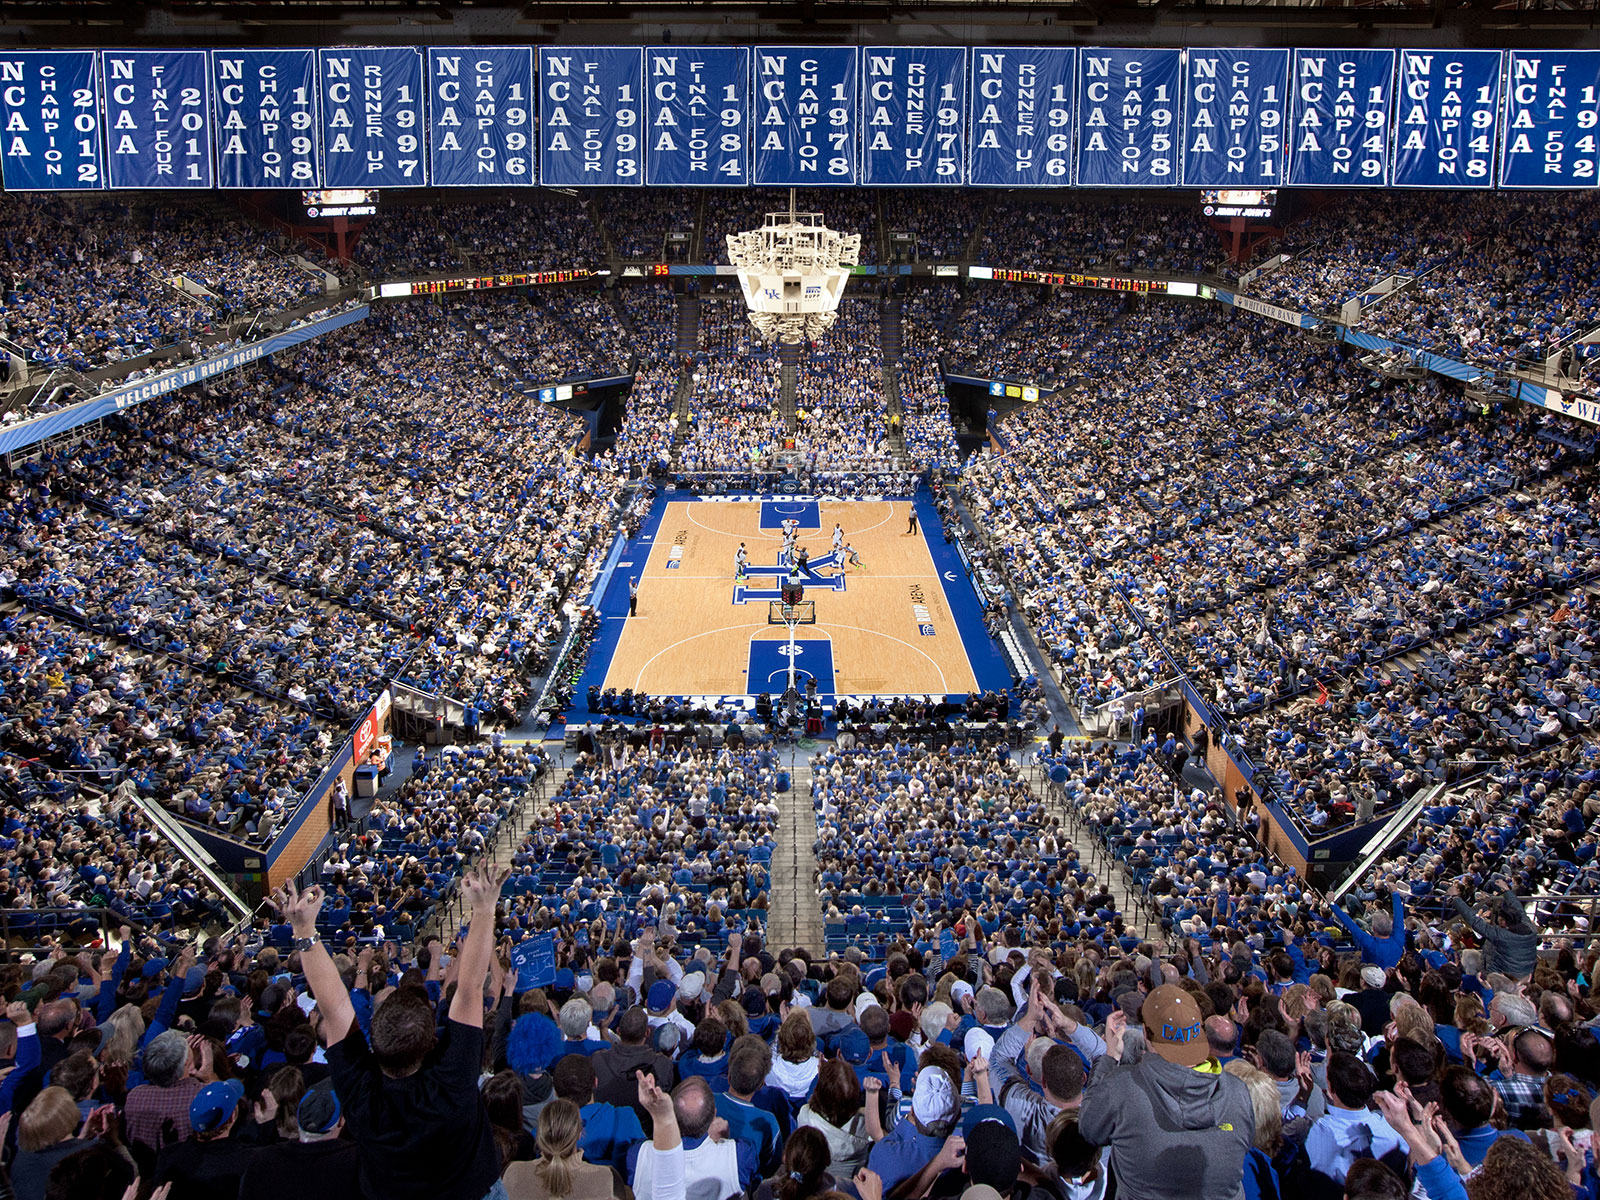 Rupp Arena Banners